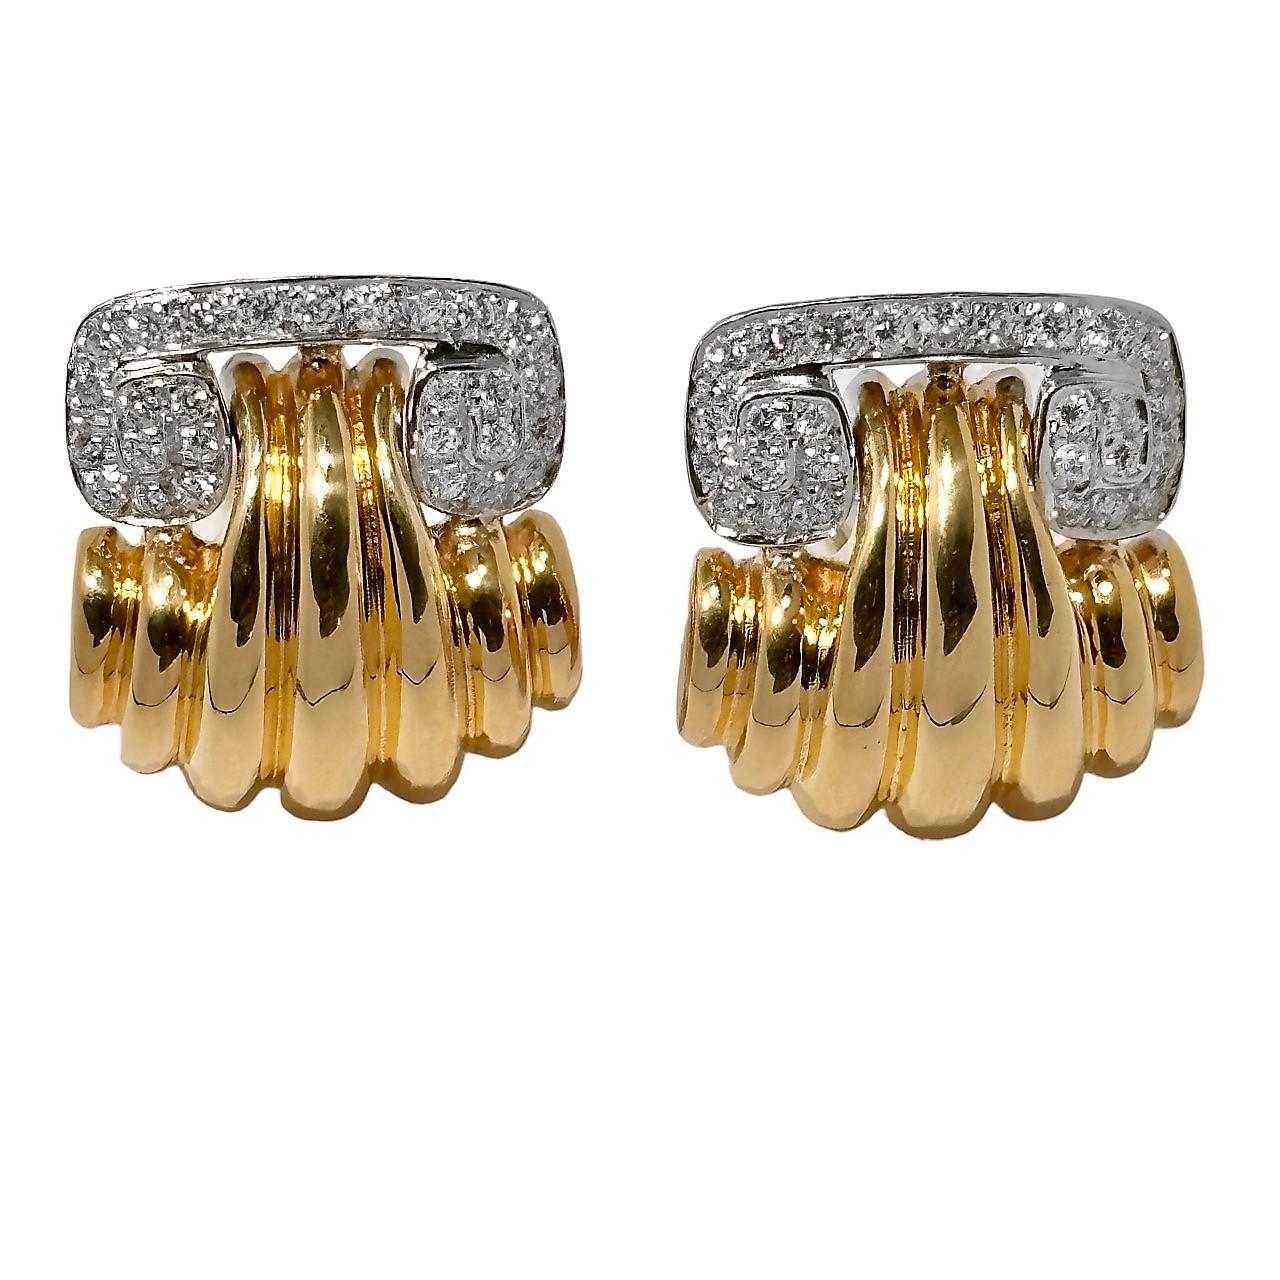 This bold and finely crafted pair of mid-20th Century 18k gold clip on earrings are comprised of white gold tops encrusted with brilliant cut diamonds, wedded to boldly fluted rich 18k yellow bottoms. A total of 54 brilliant cut diamonds having a